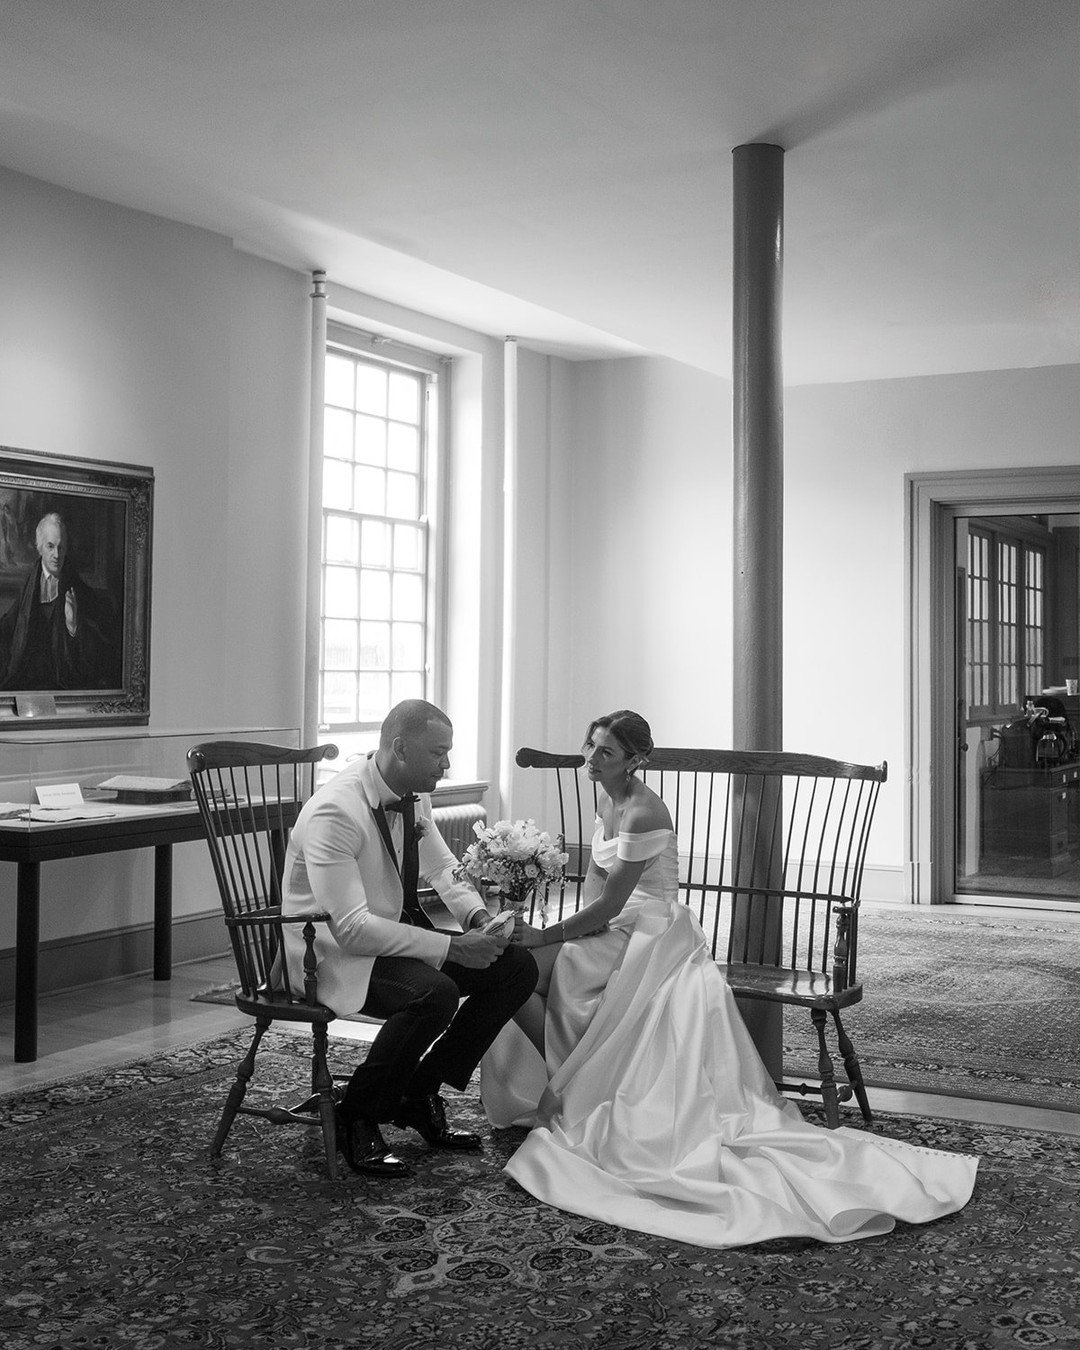 Loving these classic glamour film shots from the Cassello wedding at Union Trust! Congrats Brittany &amp; AJ!

@rachel.jpeg_ really knows how to capture the beauty of the moment 😍📸